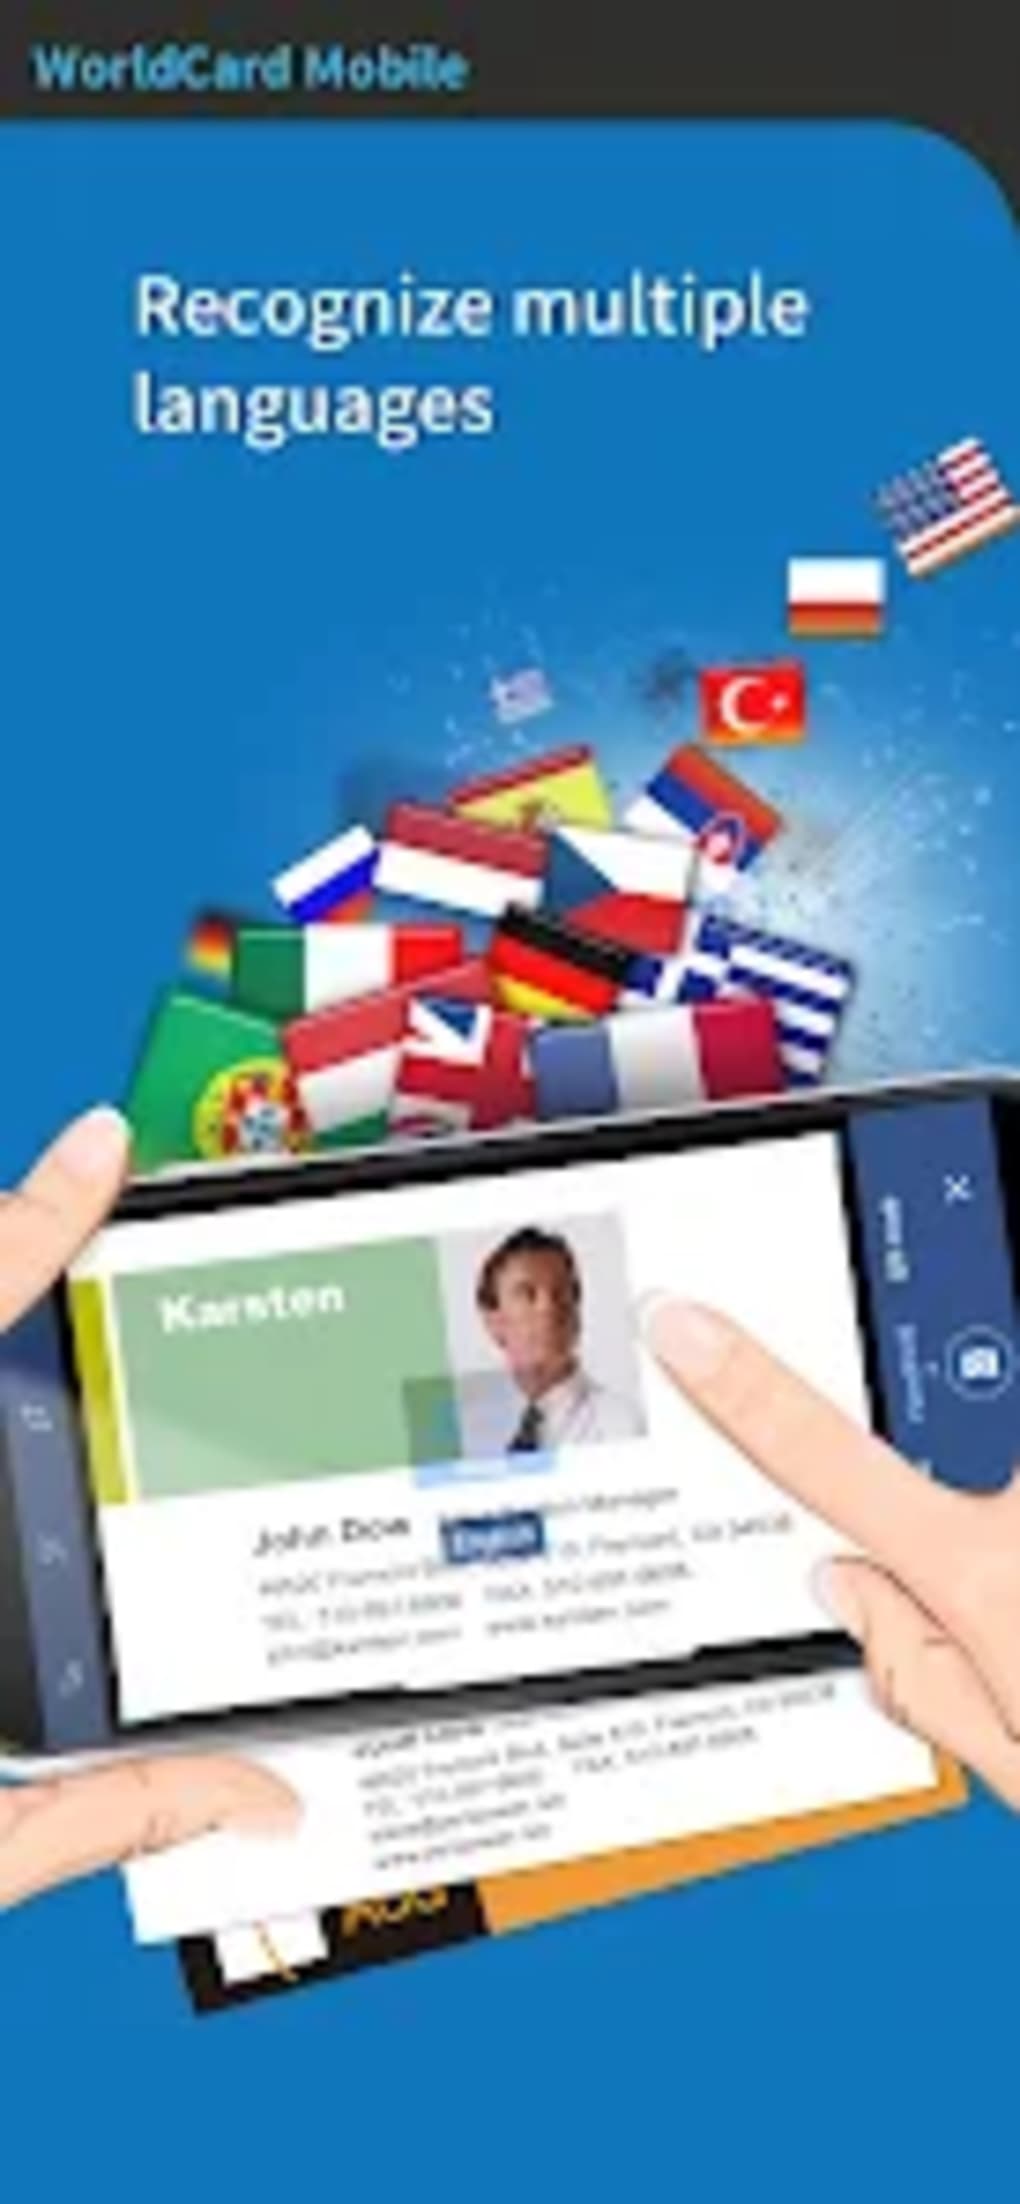 worldcard mobile lite android